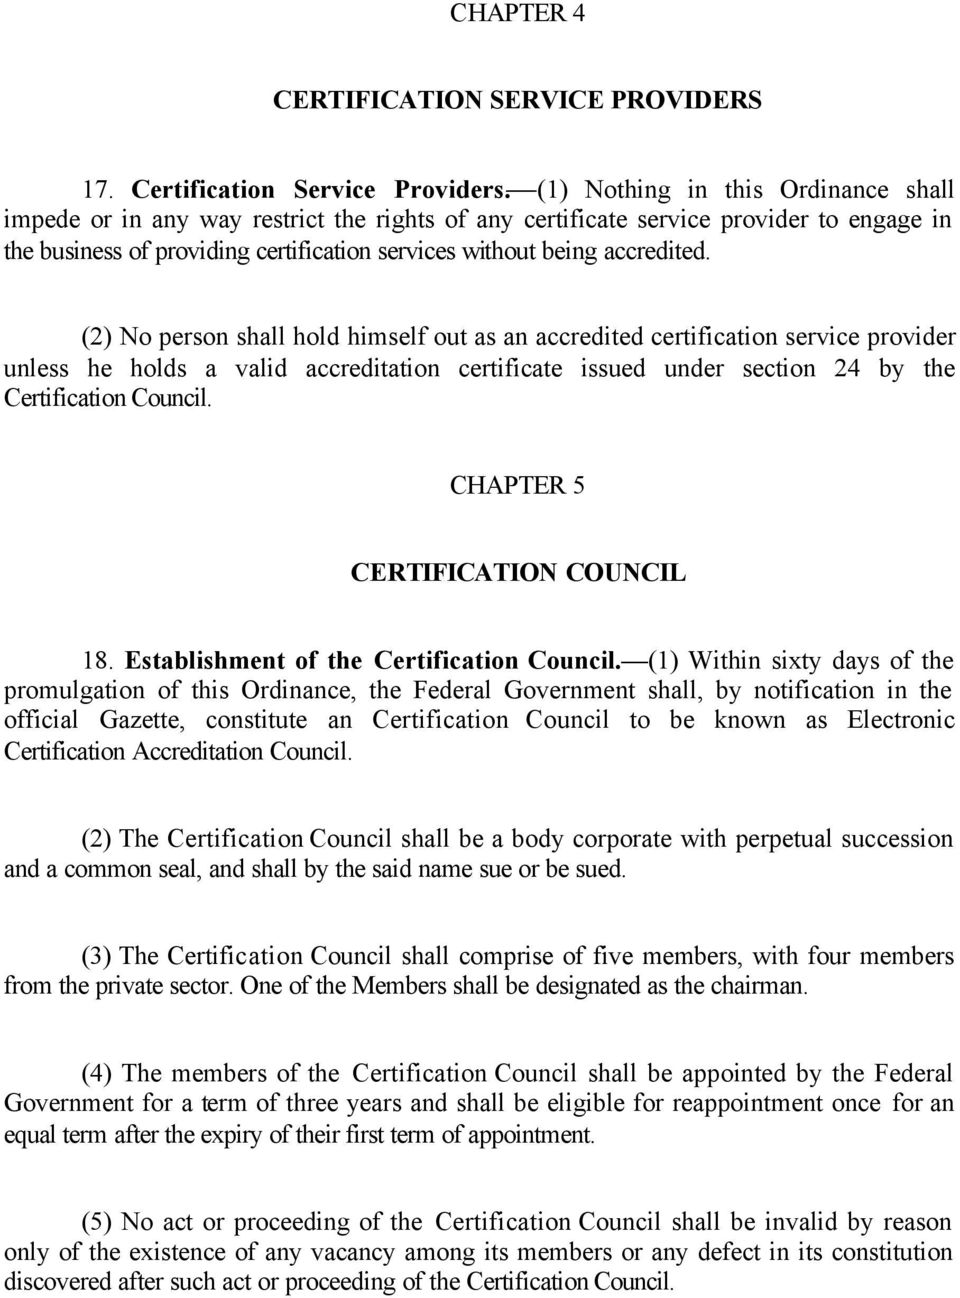 (2) No person shall hold himself out as an accredited certification service provider unless he holds a valid accreditation certificate issued under section 24 by the Certification Council.